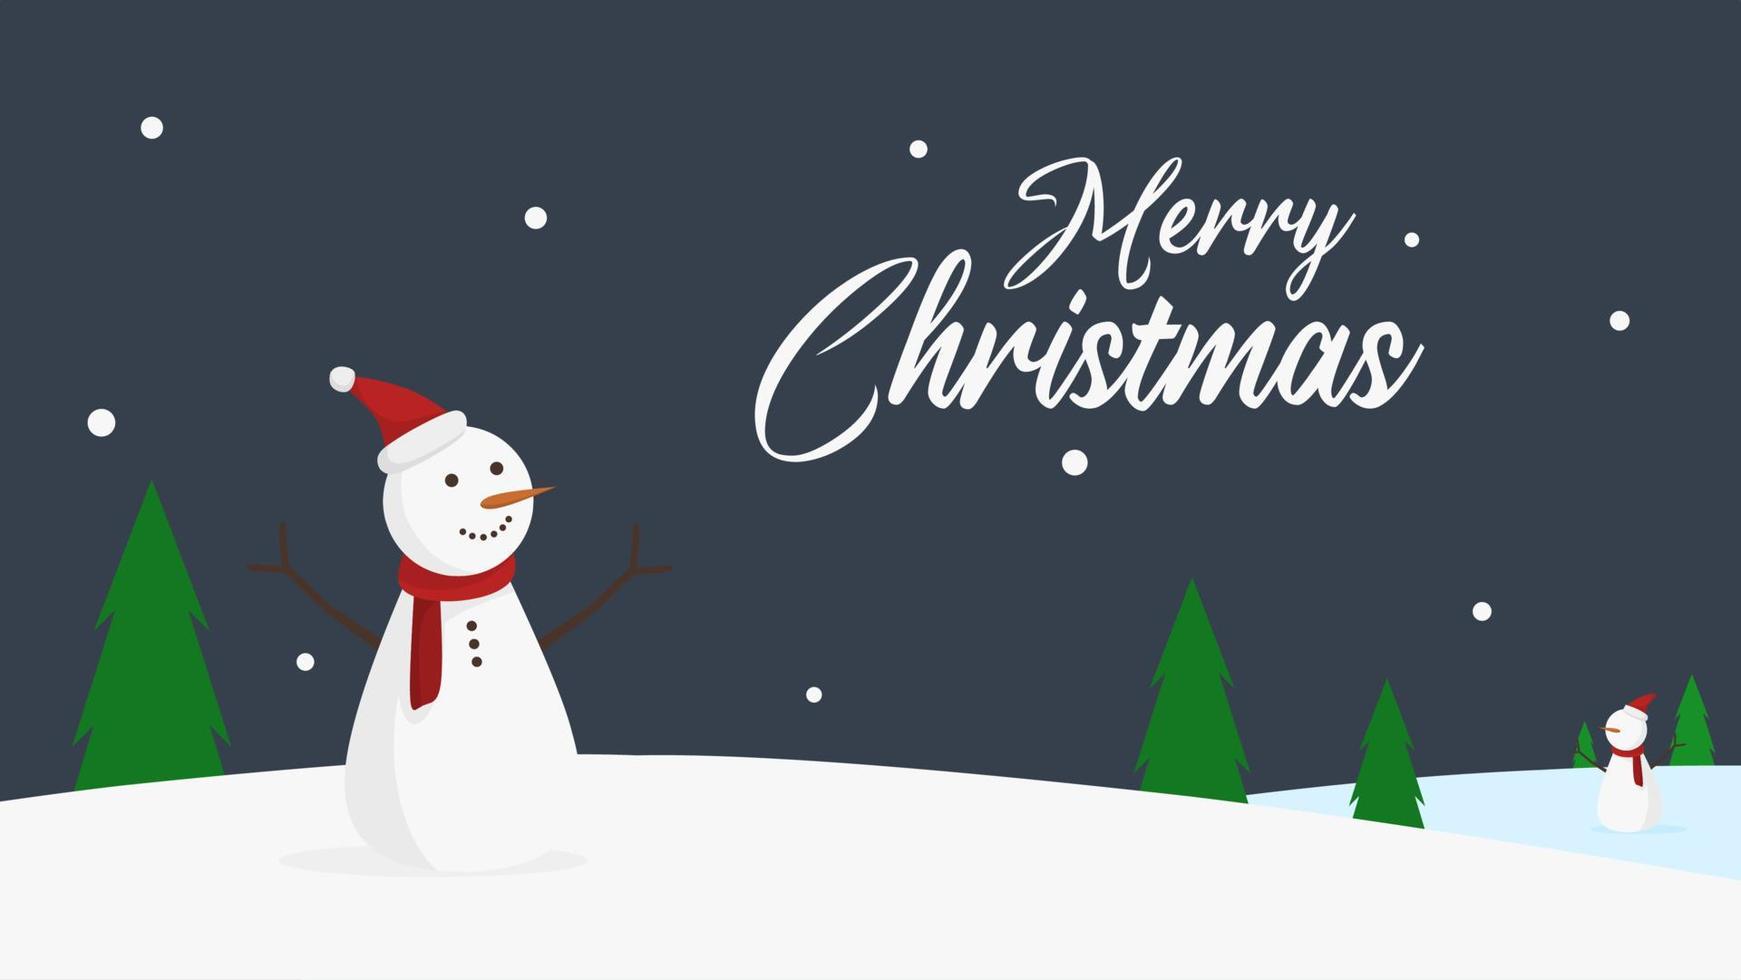 christmas greeting card with snowman and pine trees vector